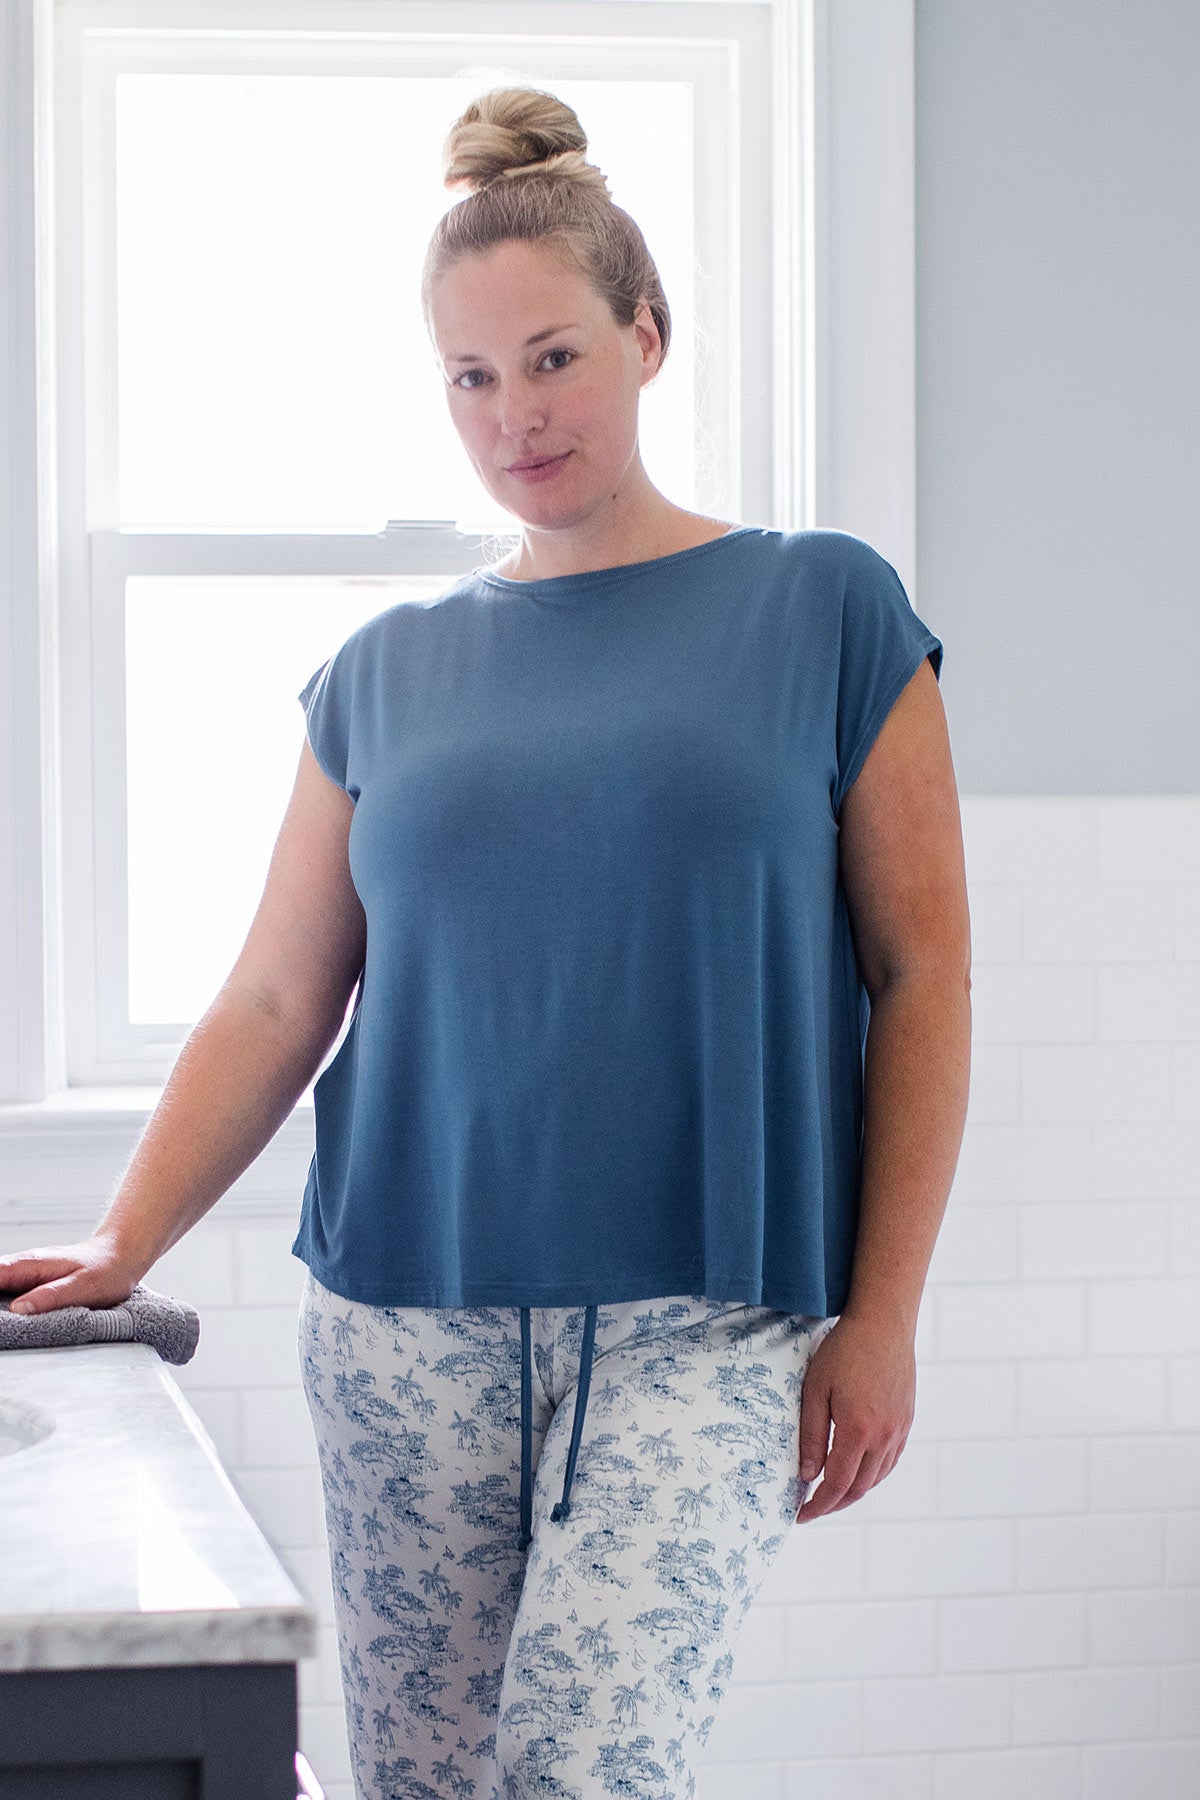 A woman standing with one hand on a countertop, wearing Yala Opal Swing Bamboo Top in Denim